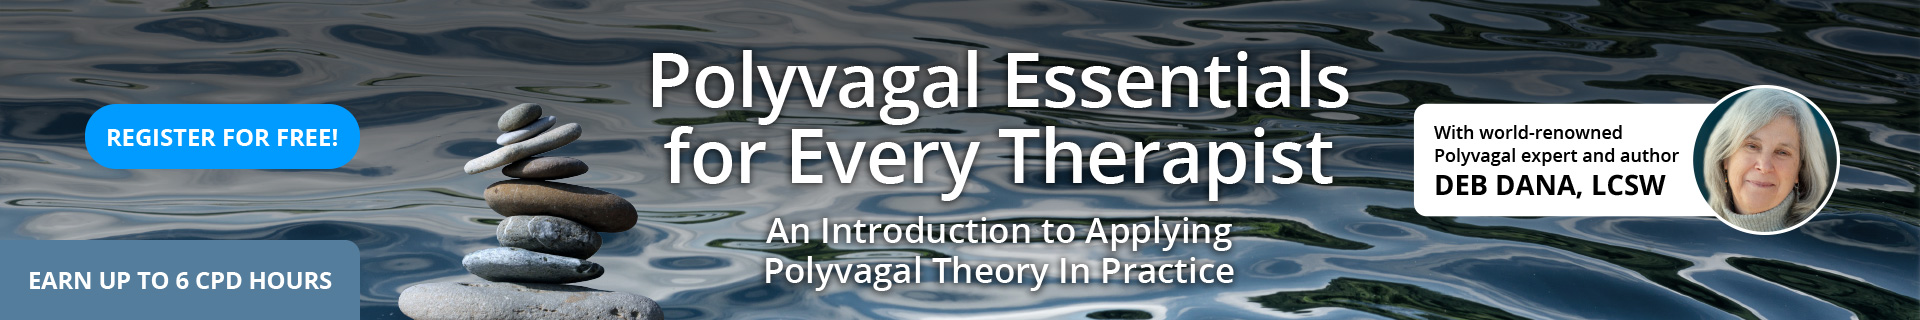 Polyvagal Essentials for Every Therapist: An Introduction to Applying Polyvagal Theory In Practice